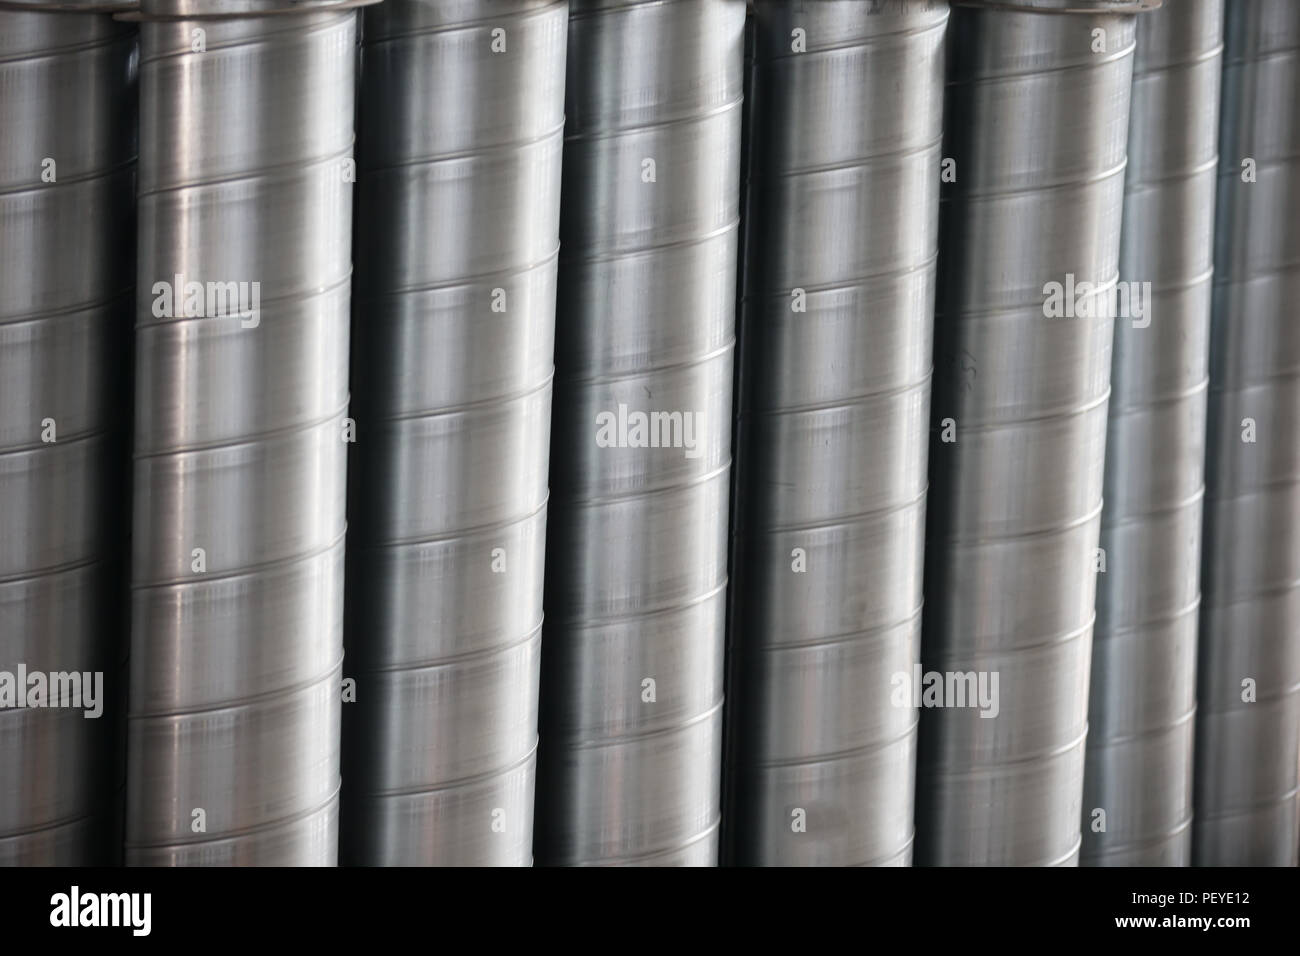 A number of metal ventilation pipes Stock Photo